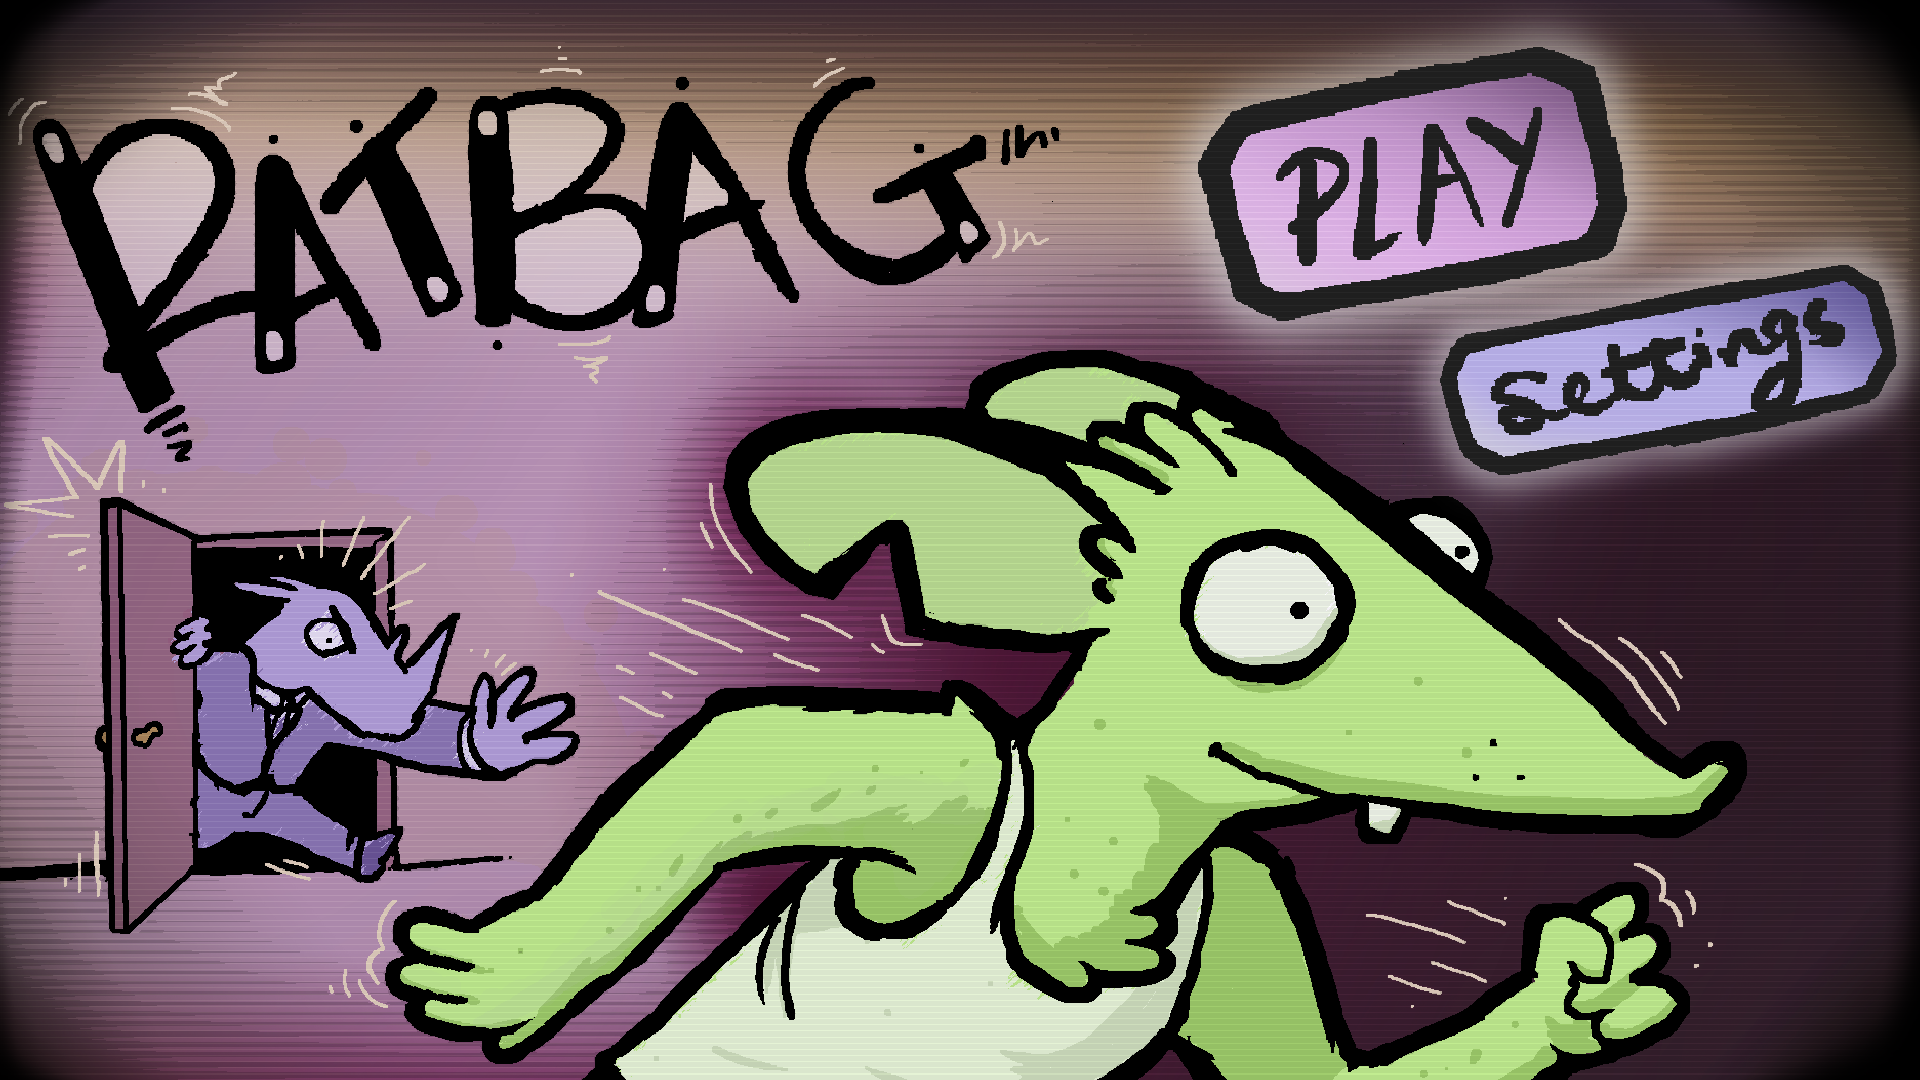 Ratbag Title Screen 10 - Both Selected (Cropped).png